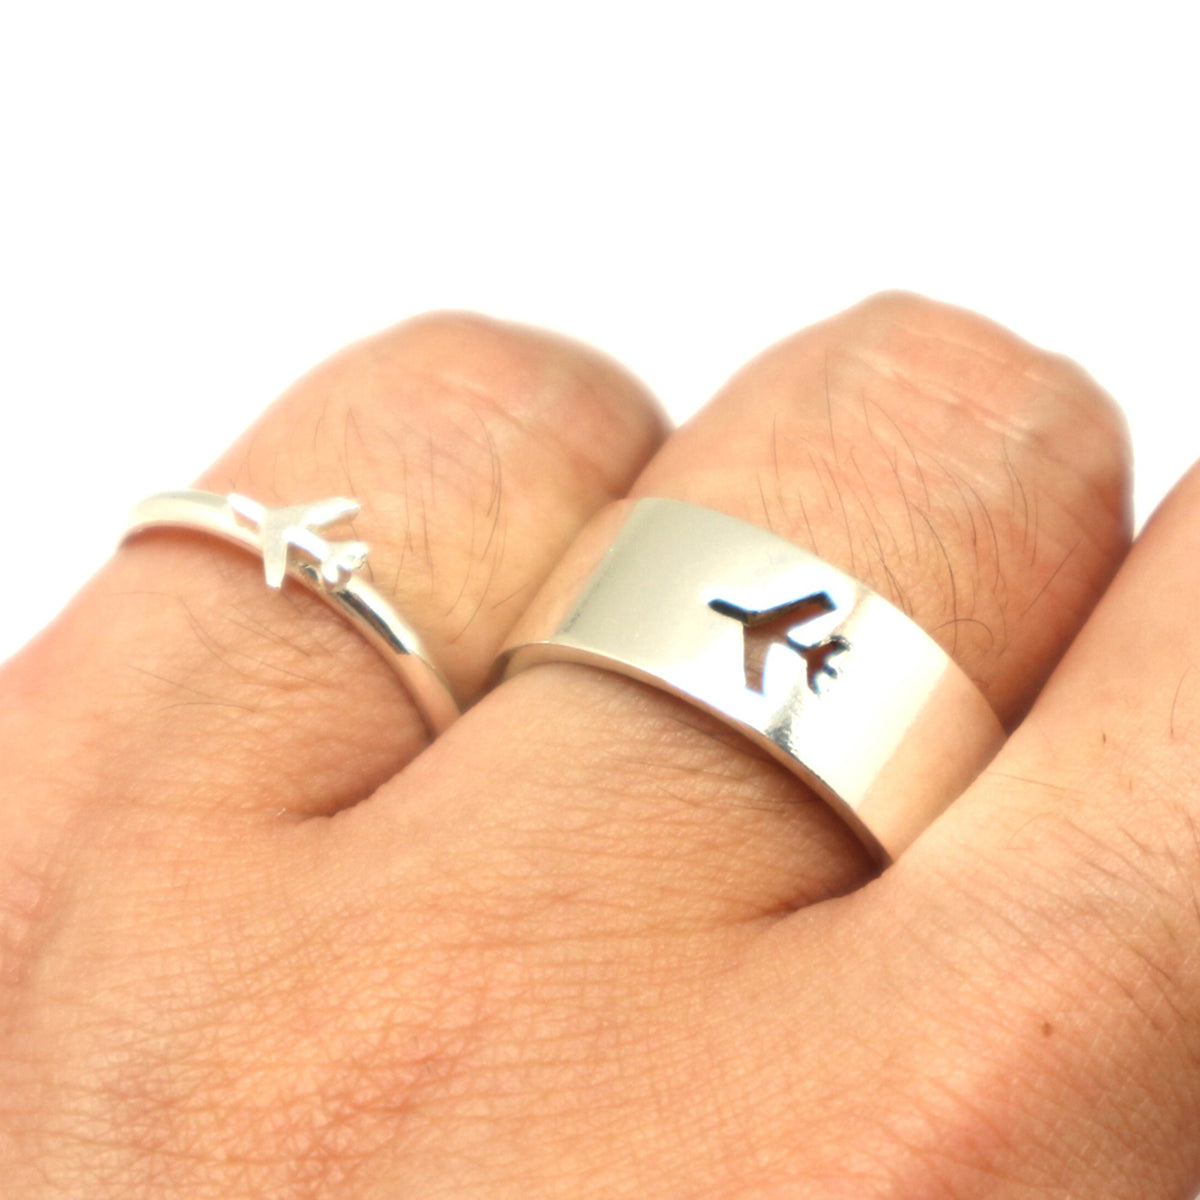 Aeroplane Silver Gold Couple ring, Best Friends Rings (4 Rings)